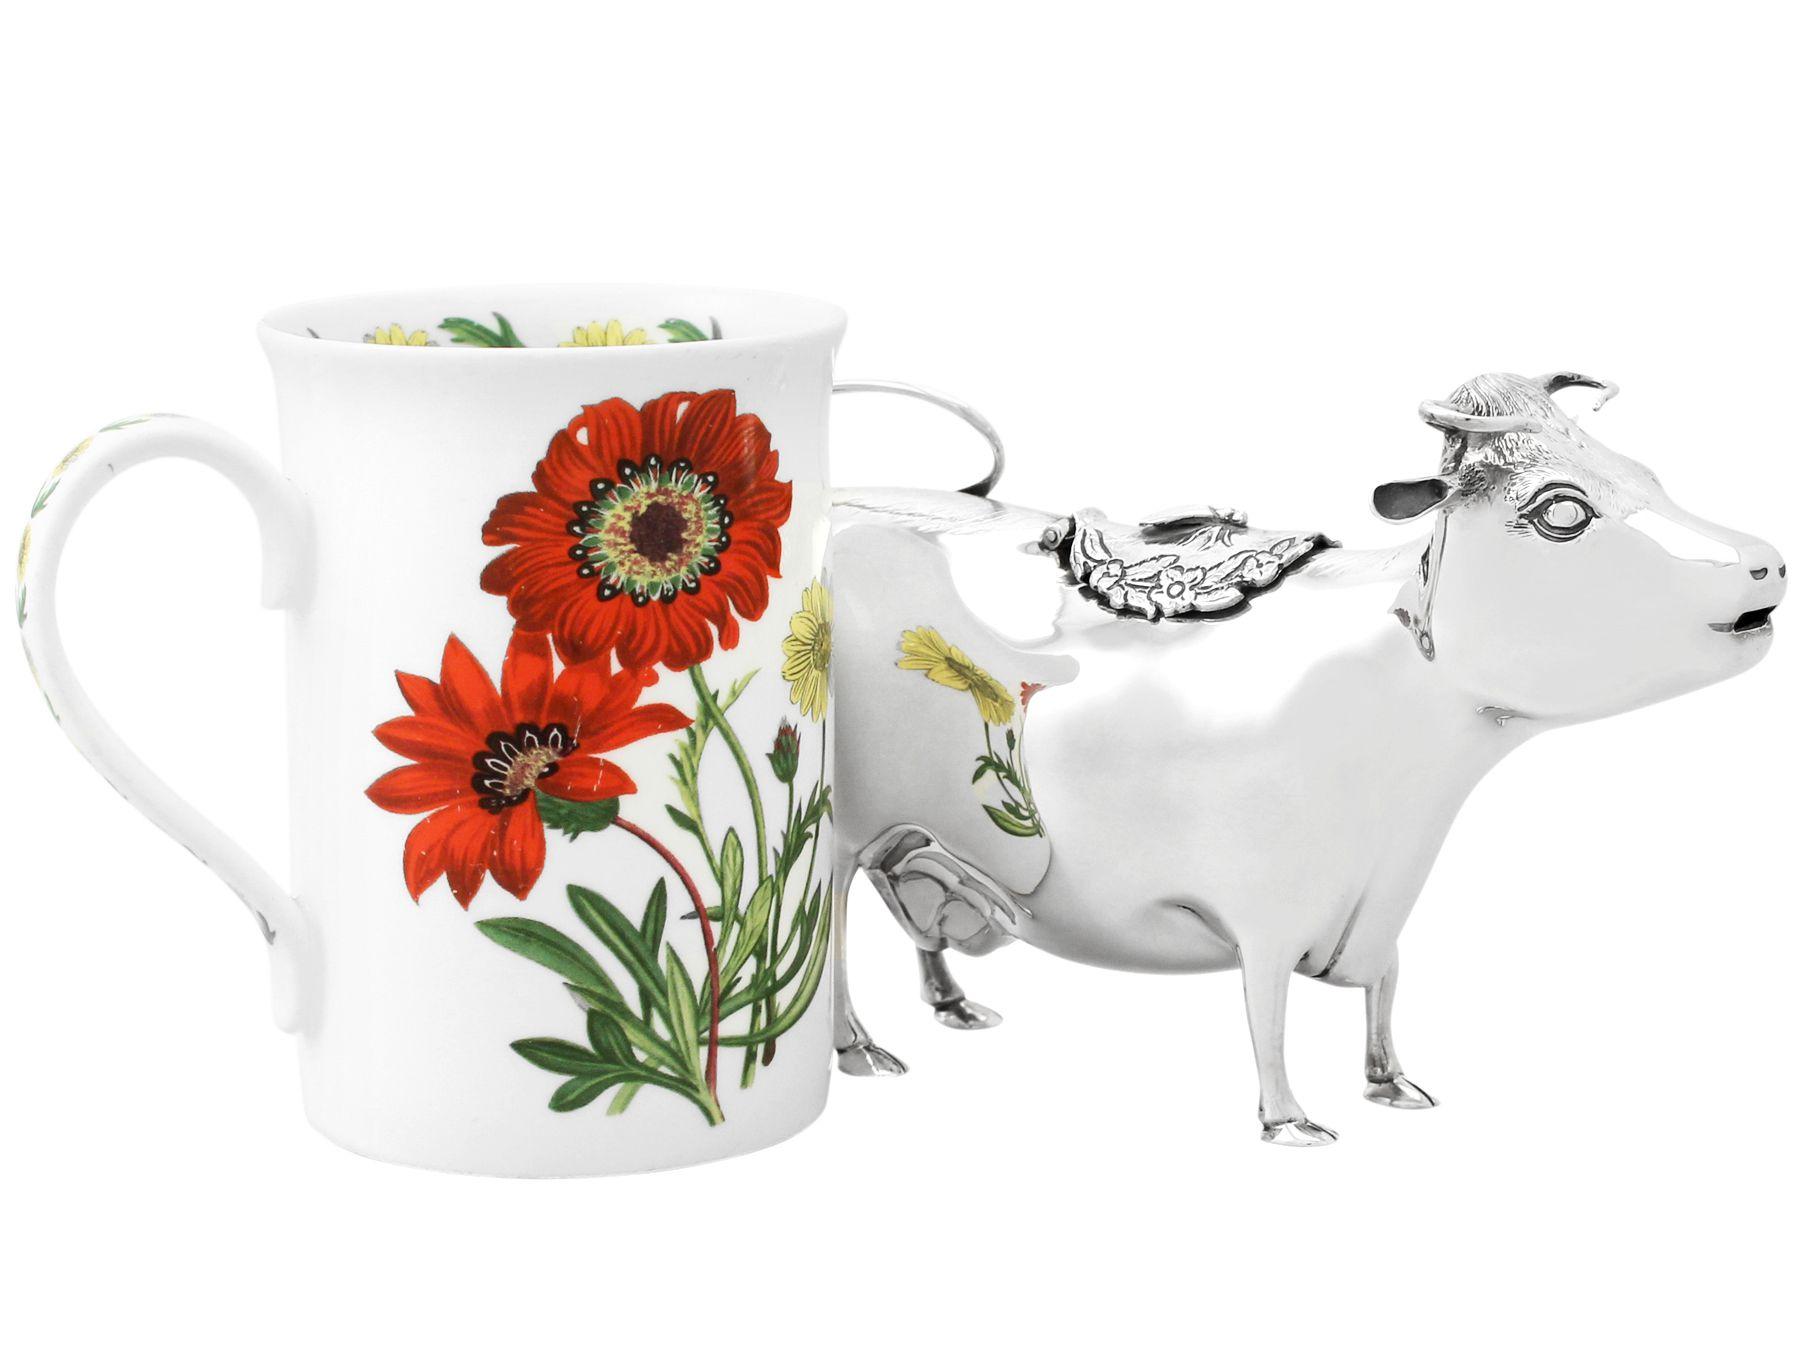 A fine and impressive vintage Elizabeth II English sterling silver cow creamer made in 18th century style; an addition to our silverware collection

This vintage Elizabeth II sterling silver cow creamer has been modelled in the style of an 18th